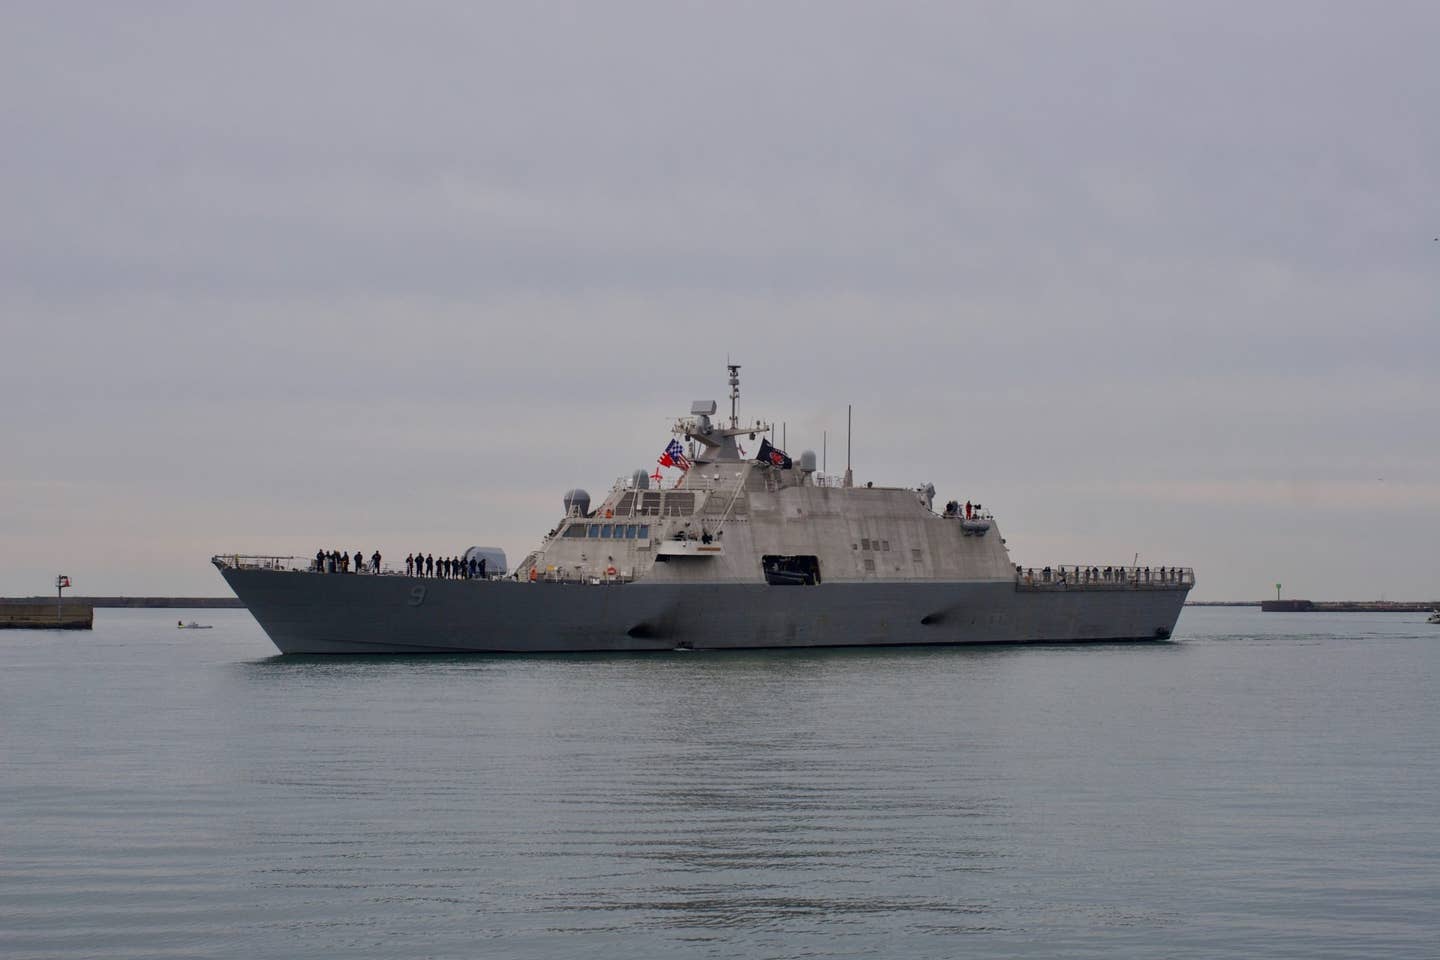 USS Little Rock (LCS 9) enters Buffalo prior to being commissioned. (Wikimedia Commons)